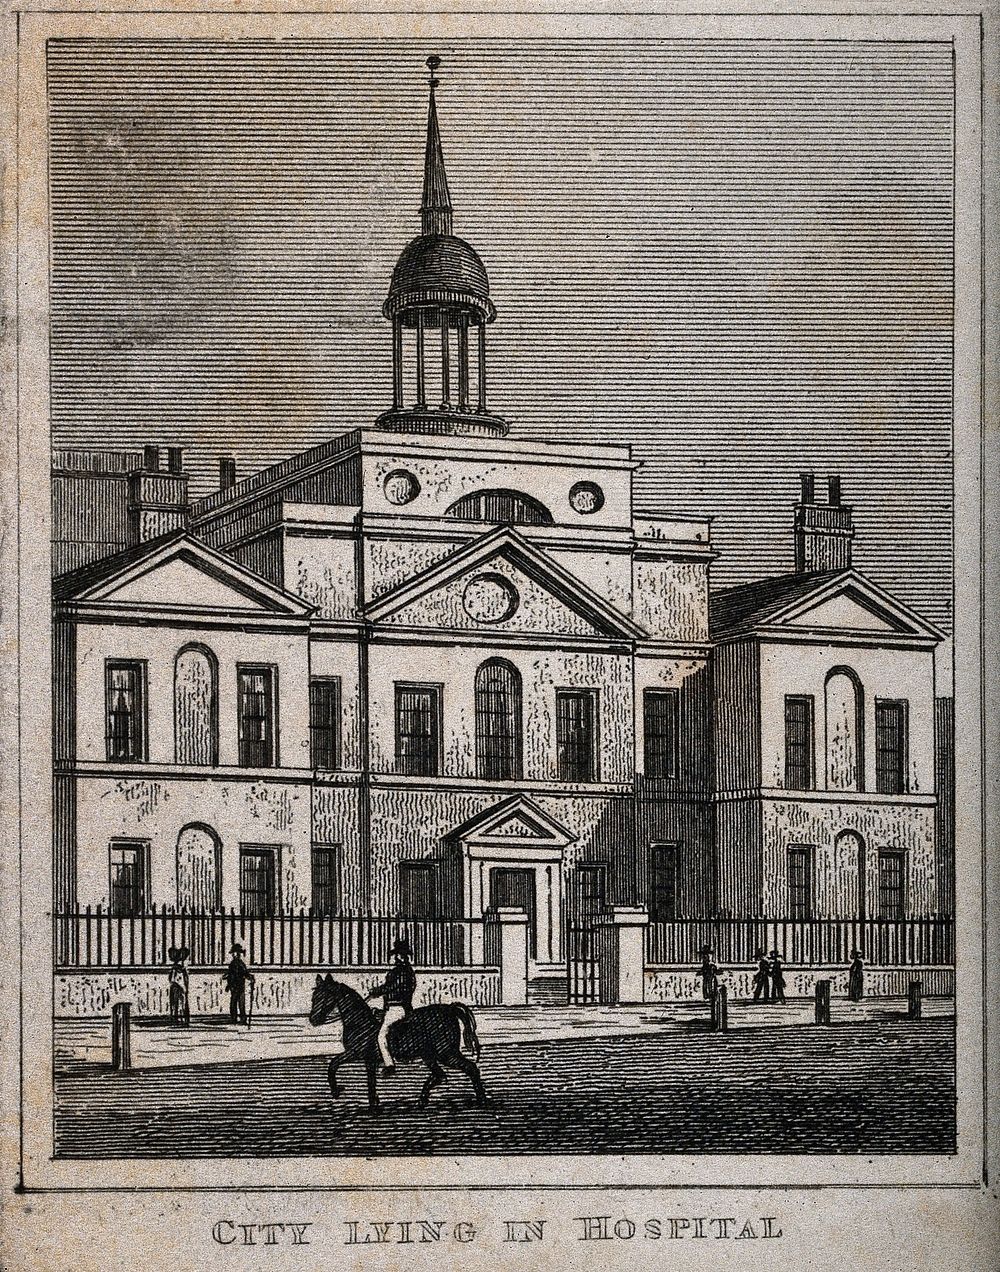 City of London Lying-in Hospital: the facade. Engraving by J. Roberts, c.1834.